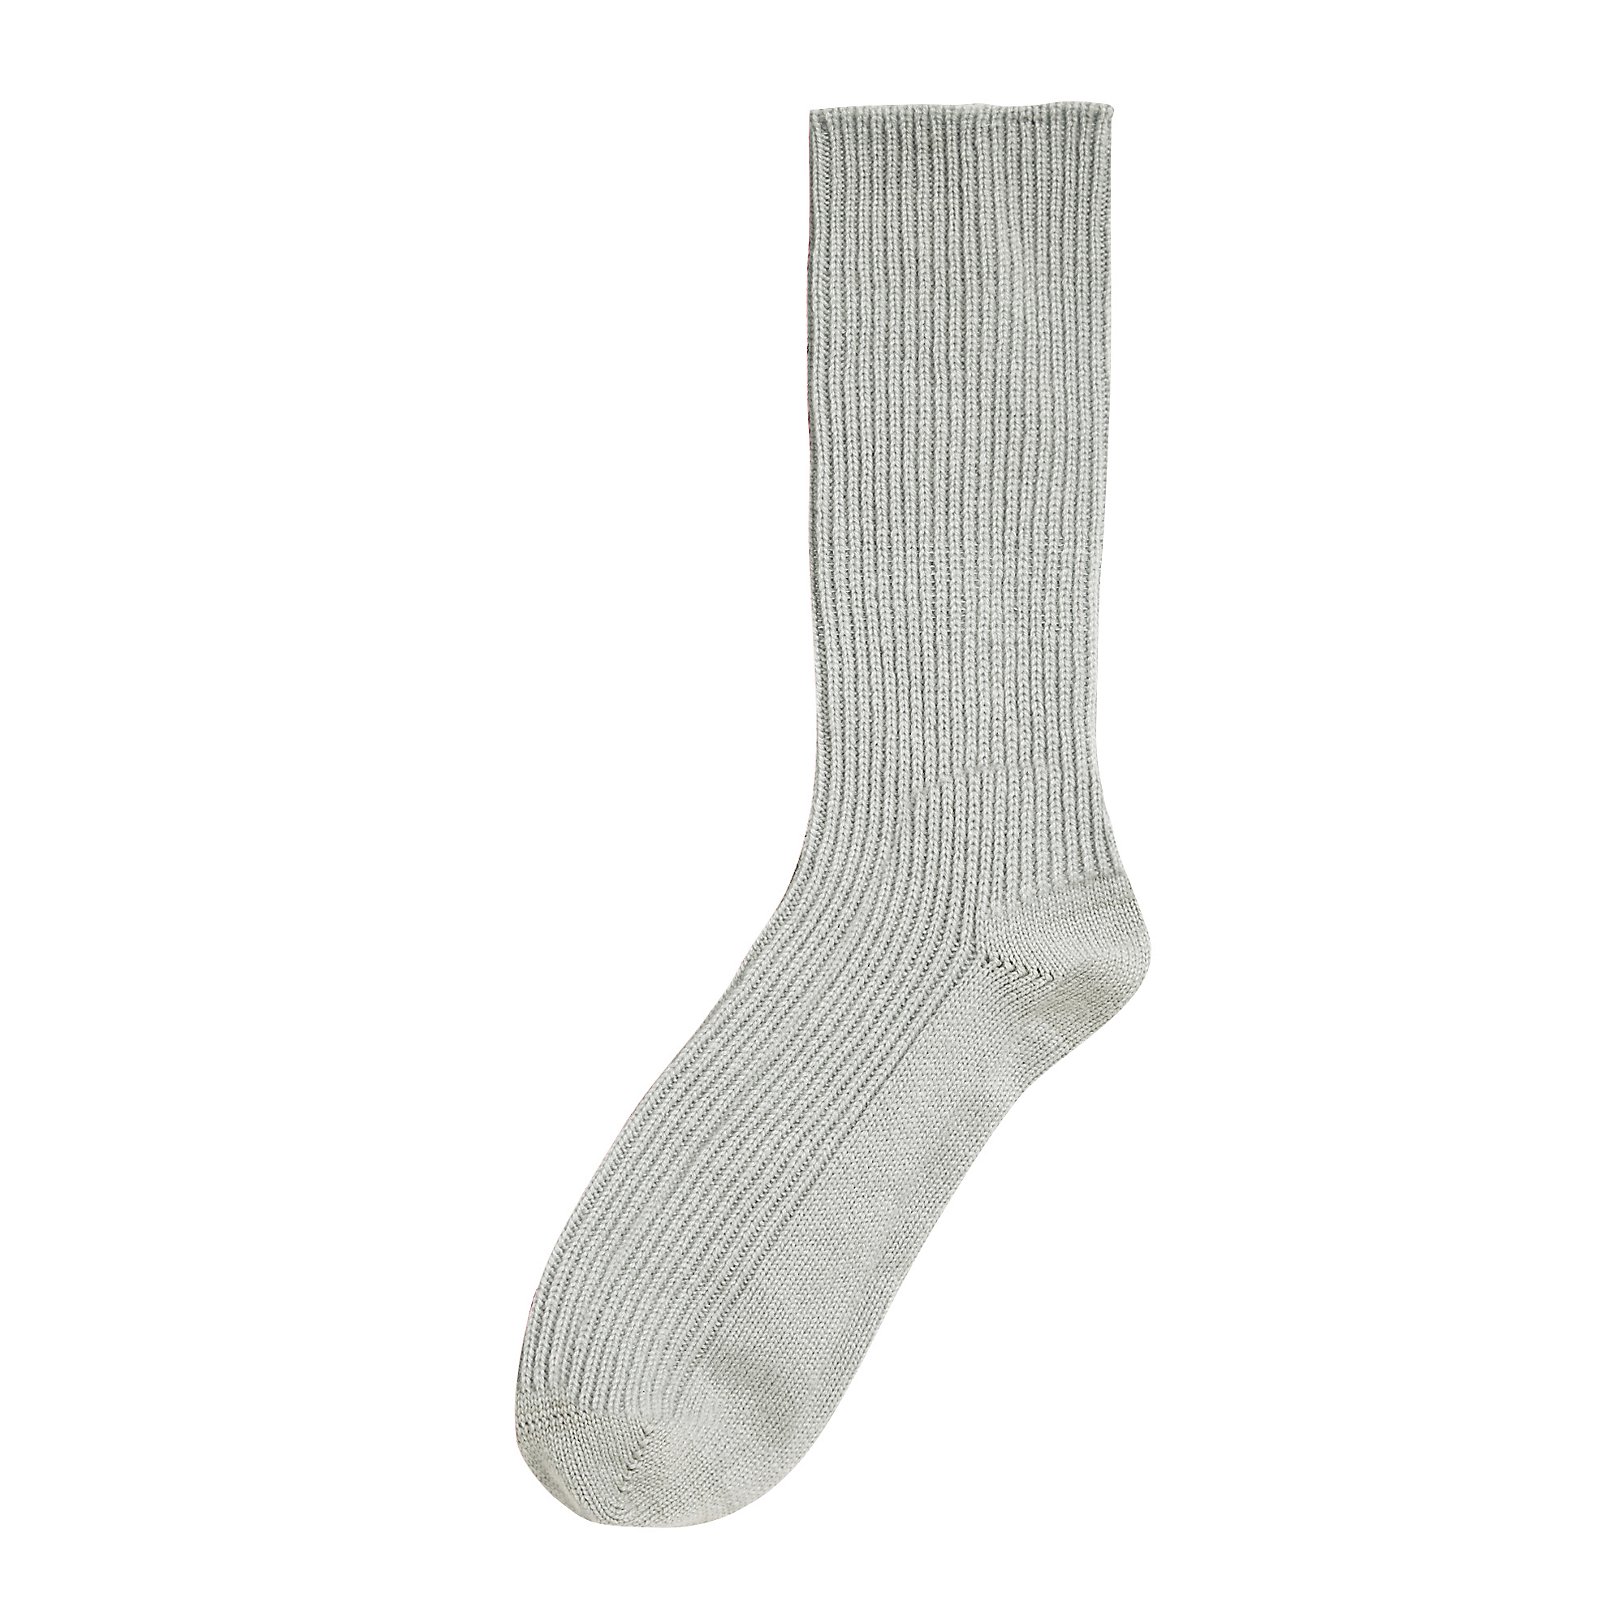 THE WHITE COMPANY Cashmere Bed Socks